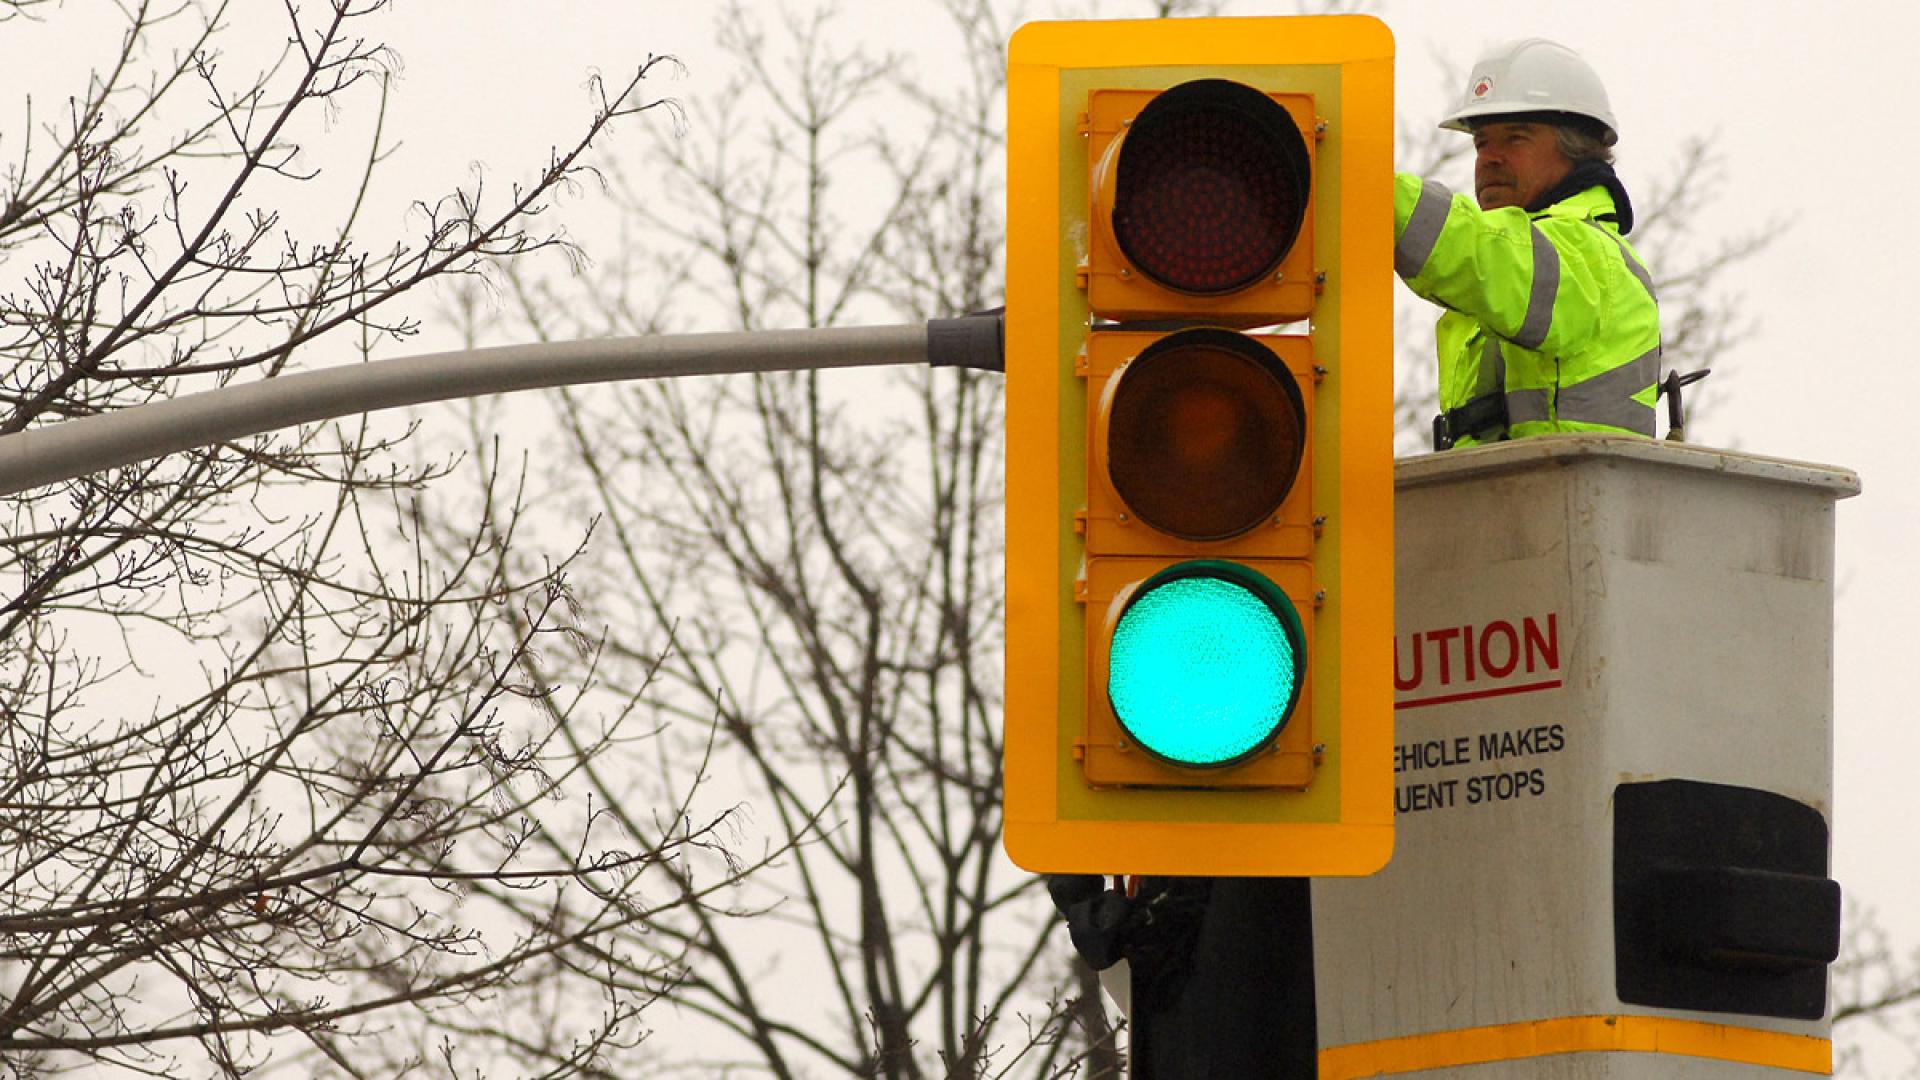 Traffic signal with green light, worker in bucket